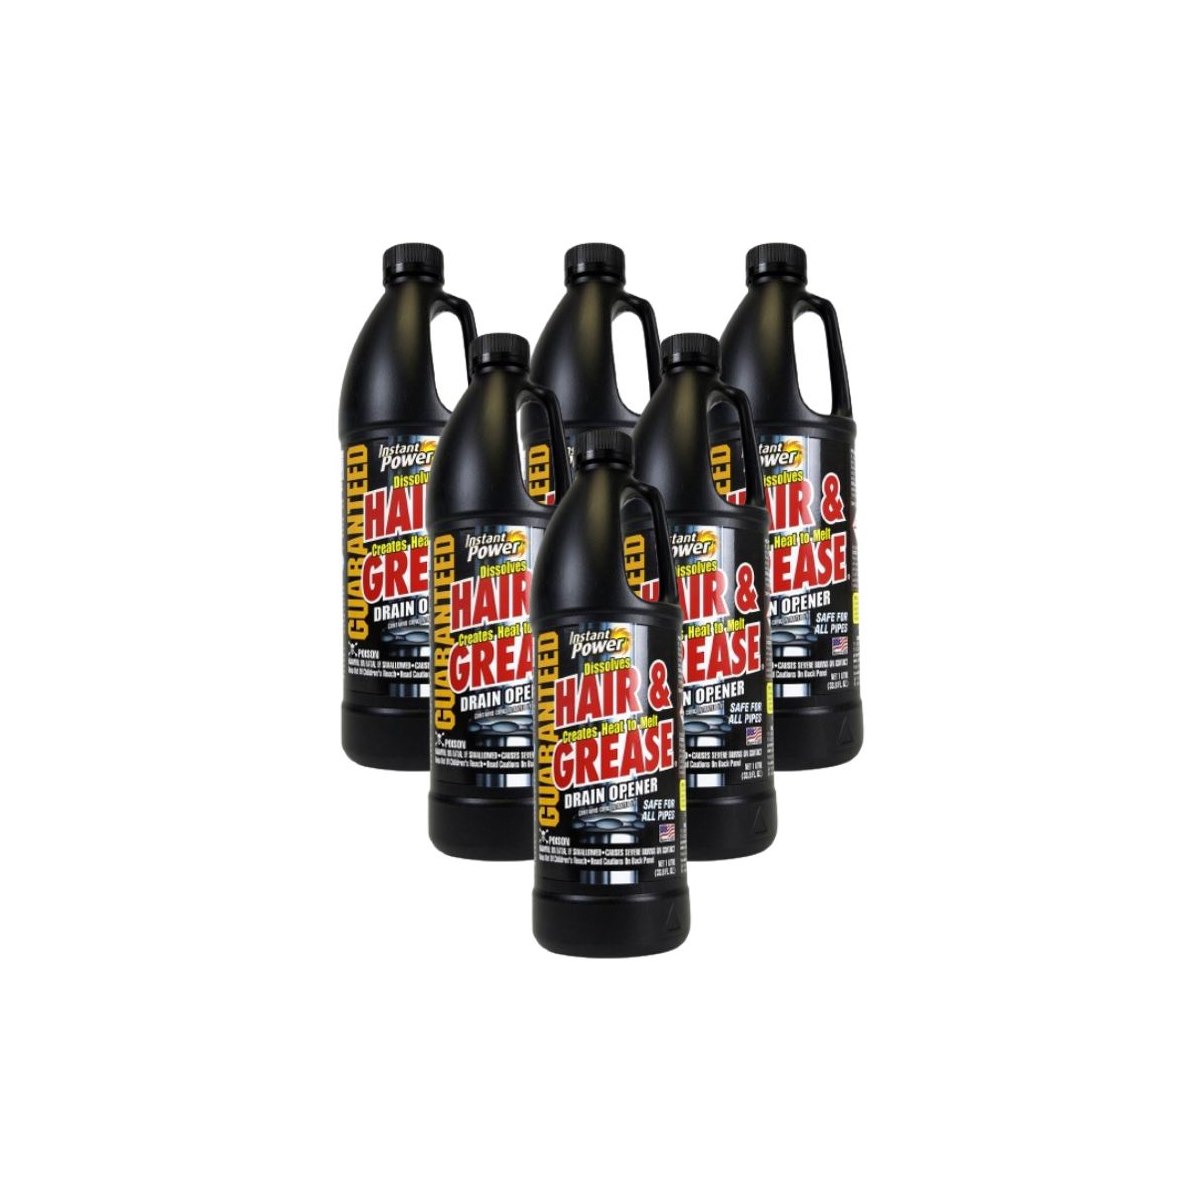 Case of 6 x Instant Power Dissolves Hair and Grease Drain Opener 1L